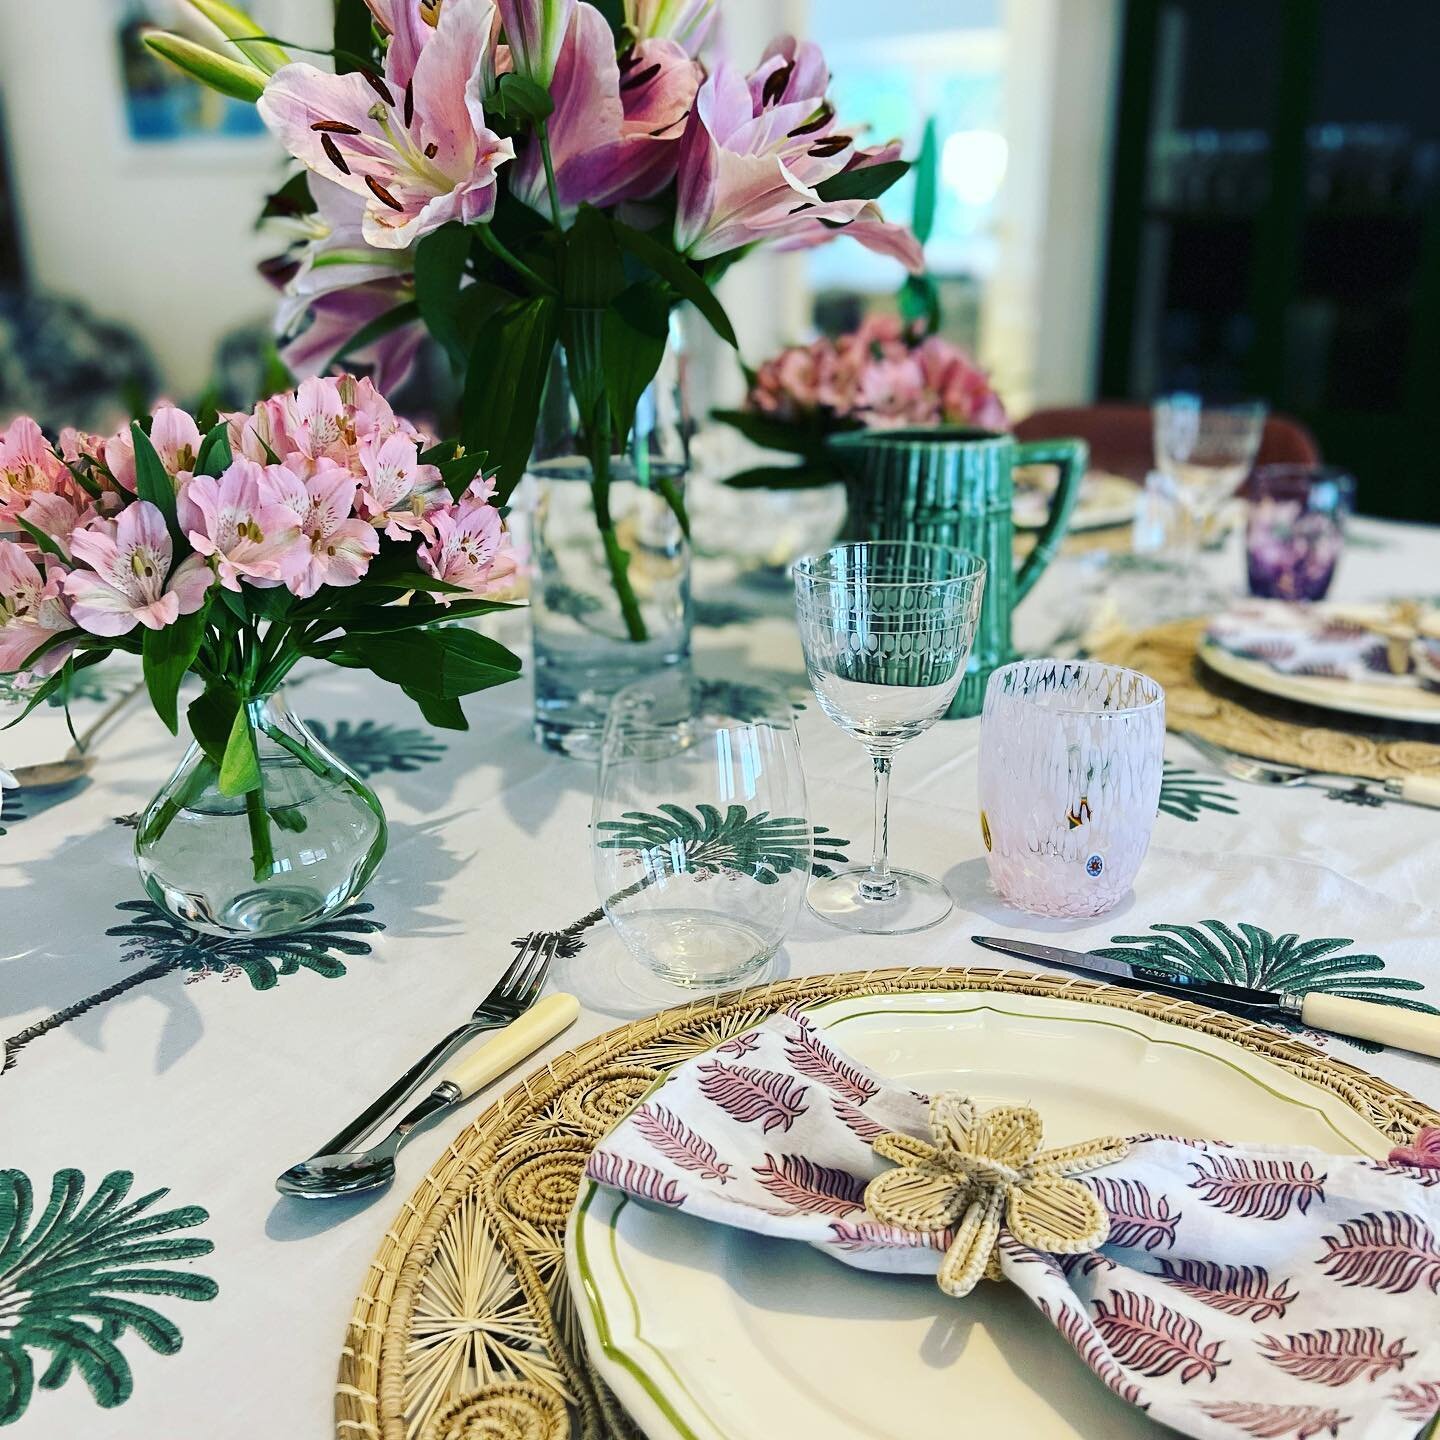 Are you Dinner Party ready? Same day delivery available online in Singapore or find us in store @araftofotters @whatwomenwant @artfulhousesing #hankiepankietables #tabledecorsg #tablescape #tablescapestyling #tablesetting #setthetablewithlove #dinner